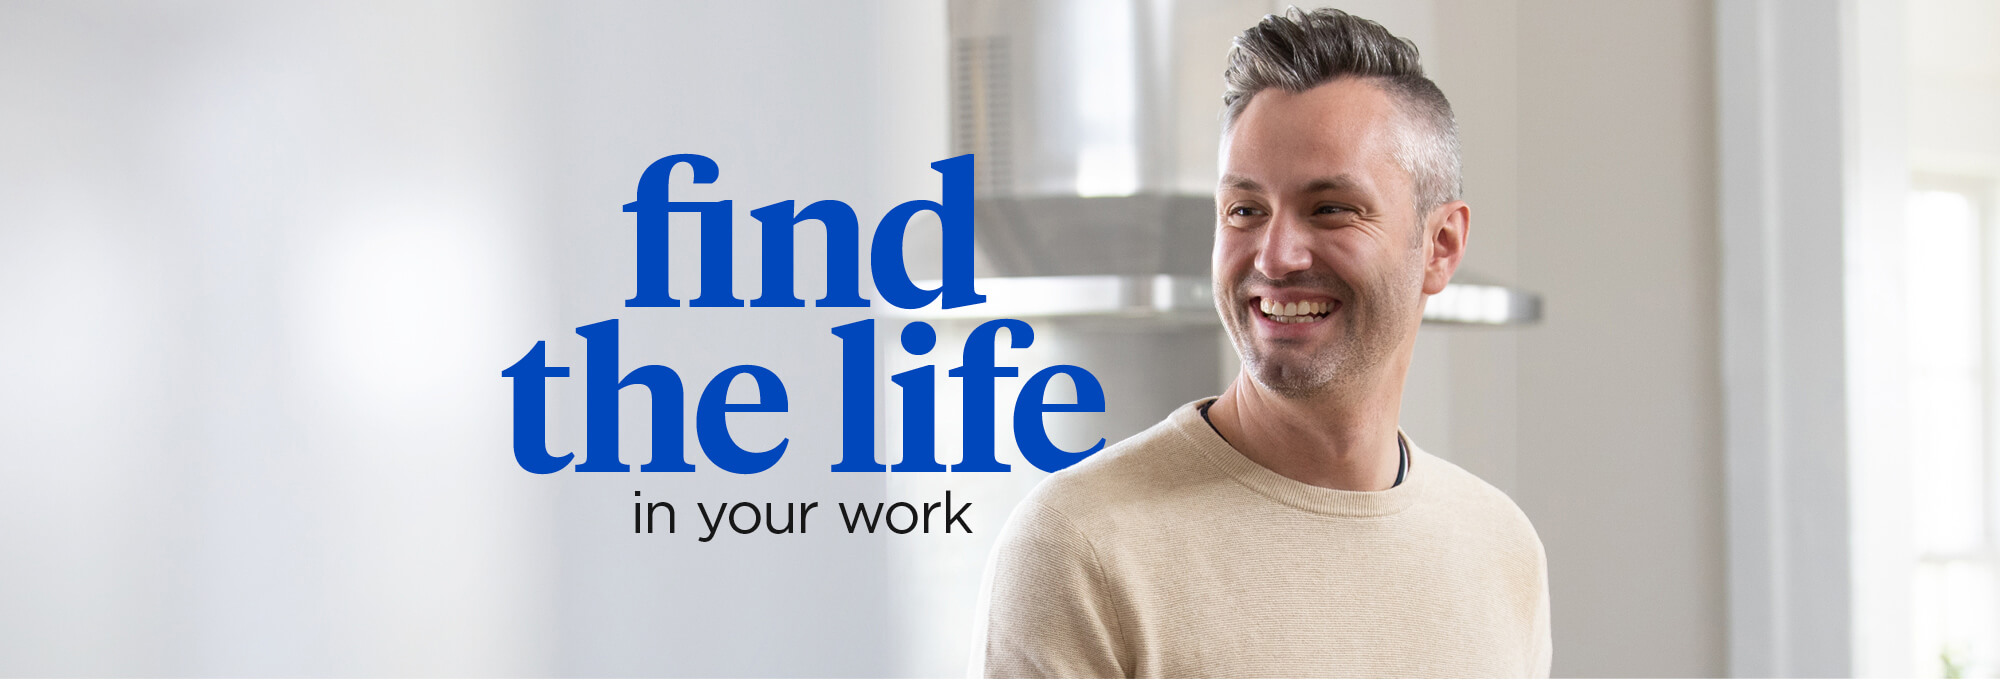 Danny - Find the life in your work